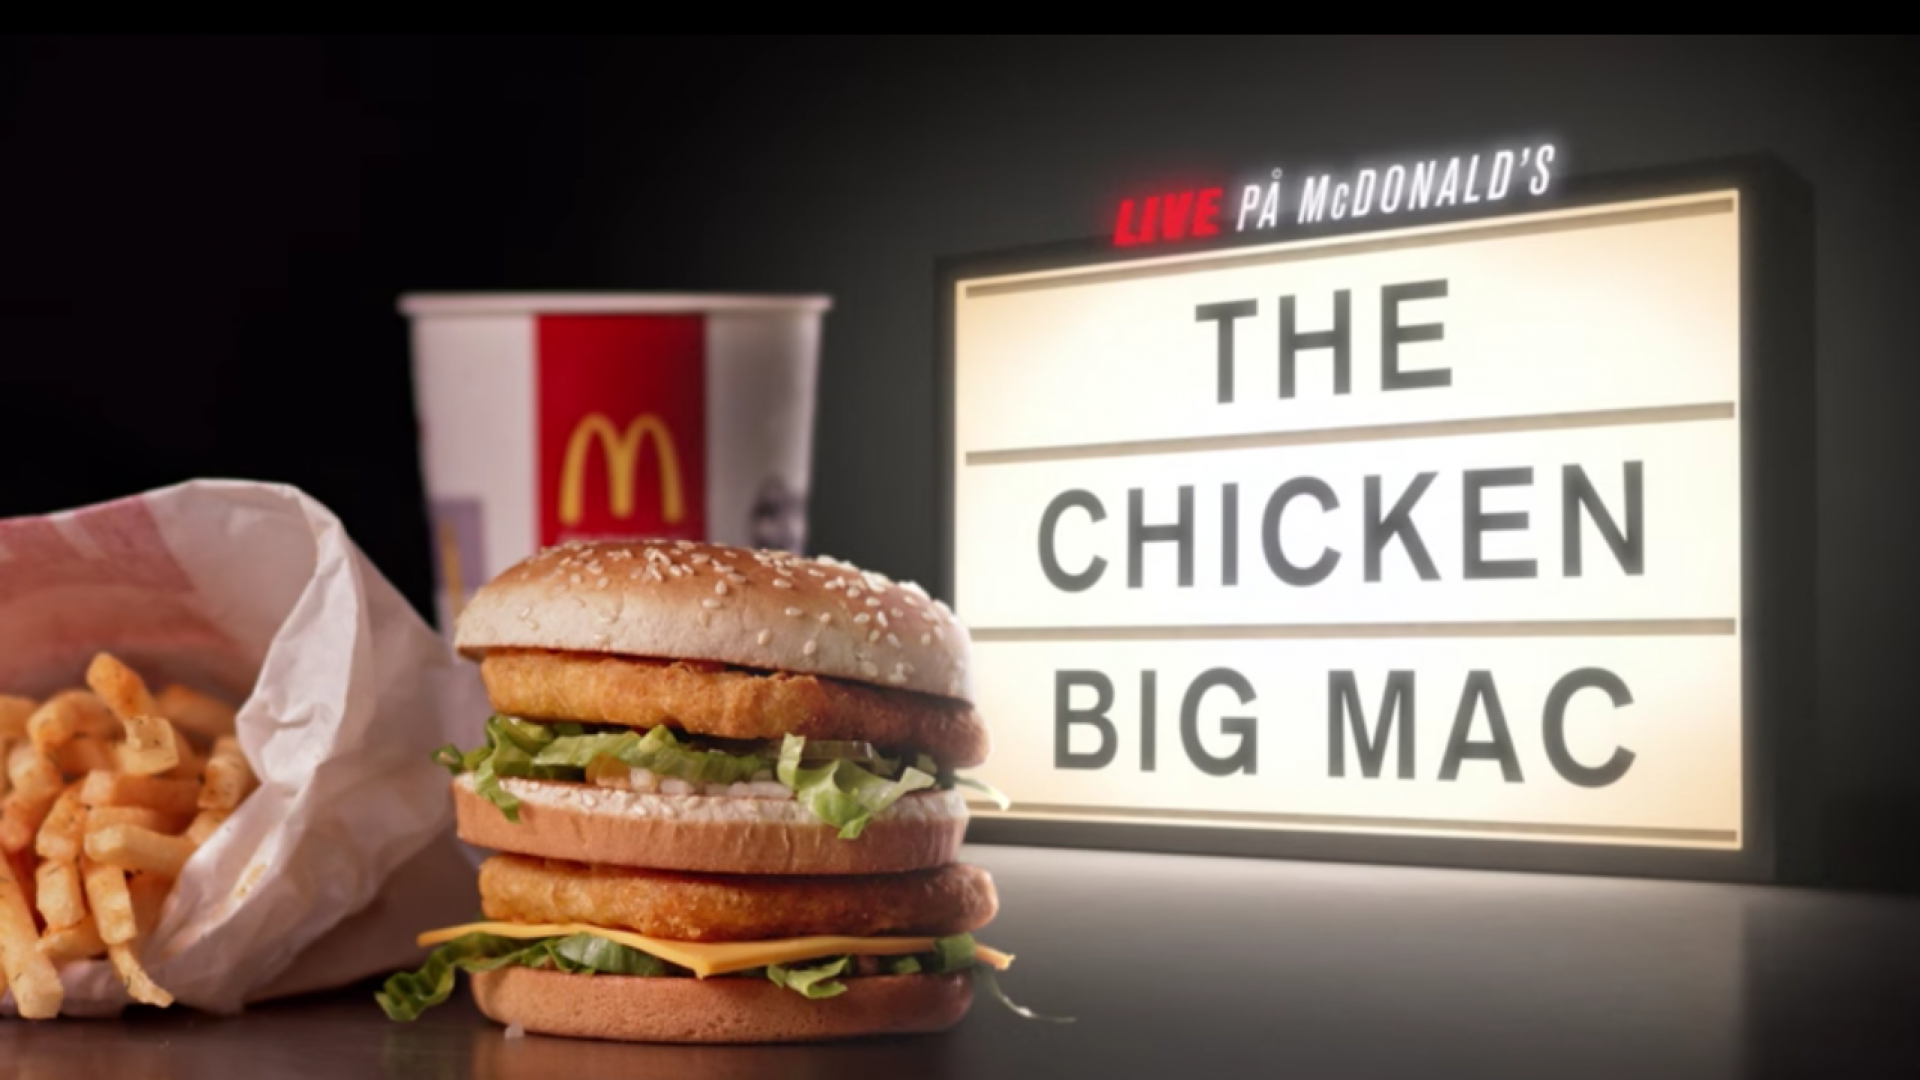 McDonald's Just Announced a Chicken Big Mac. There's Only One